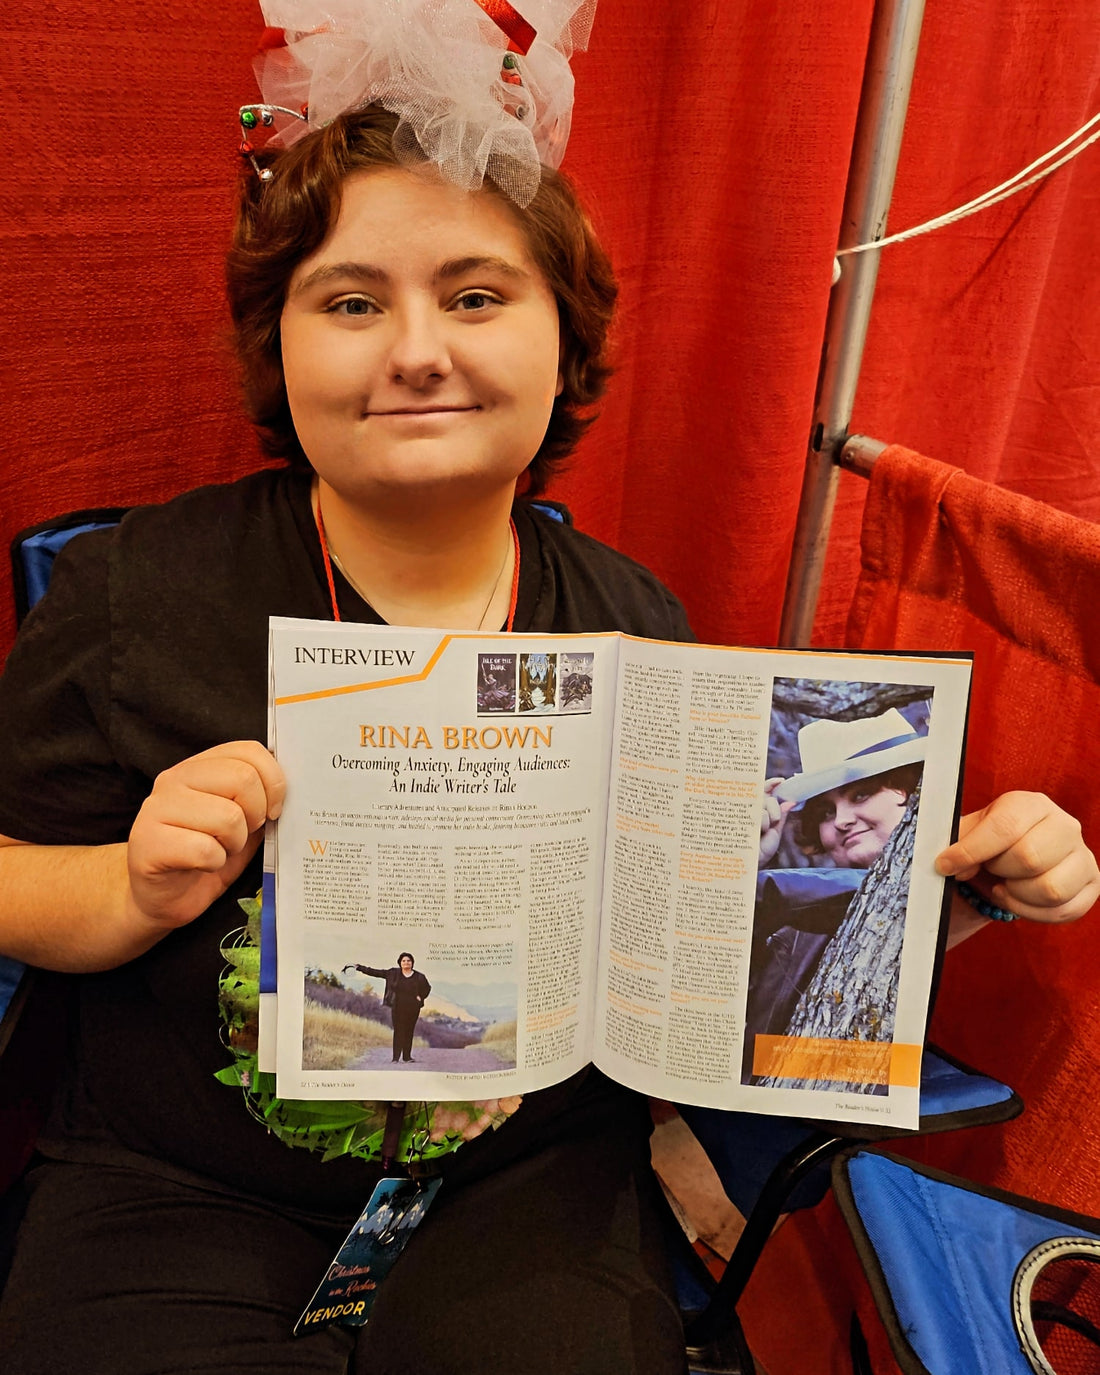 I Was Featured in a Magazine - the Best Feeling Ever!